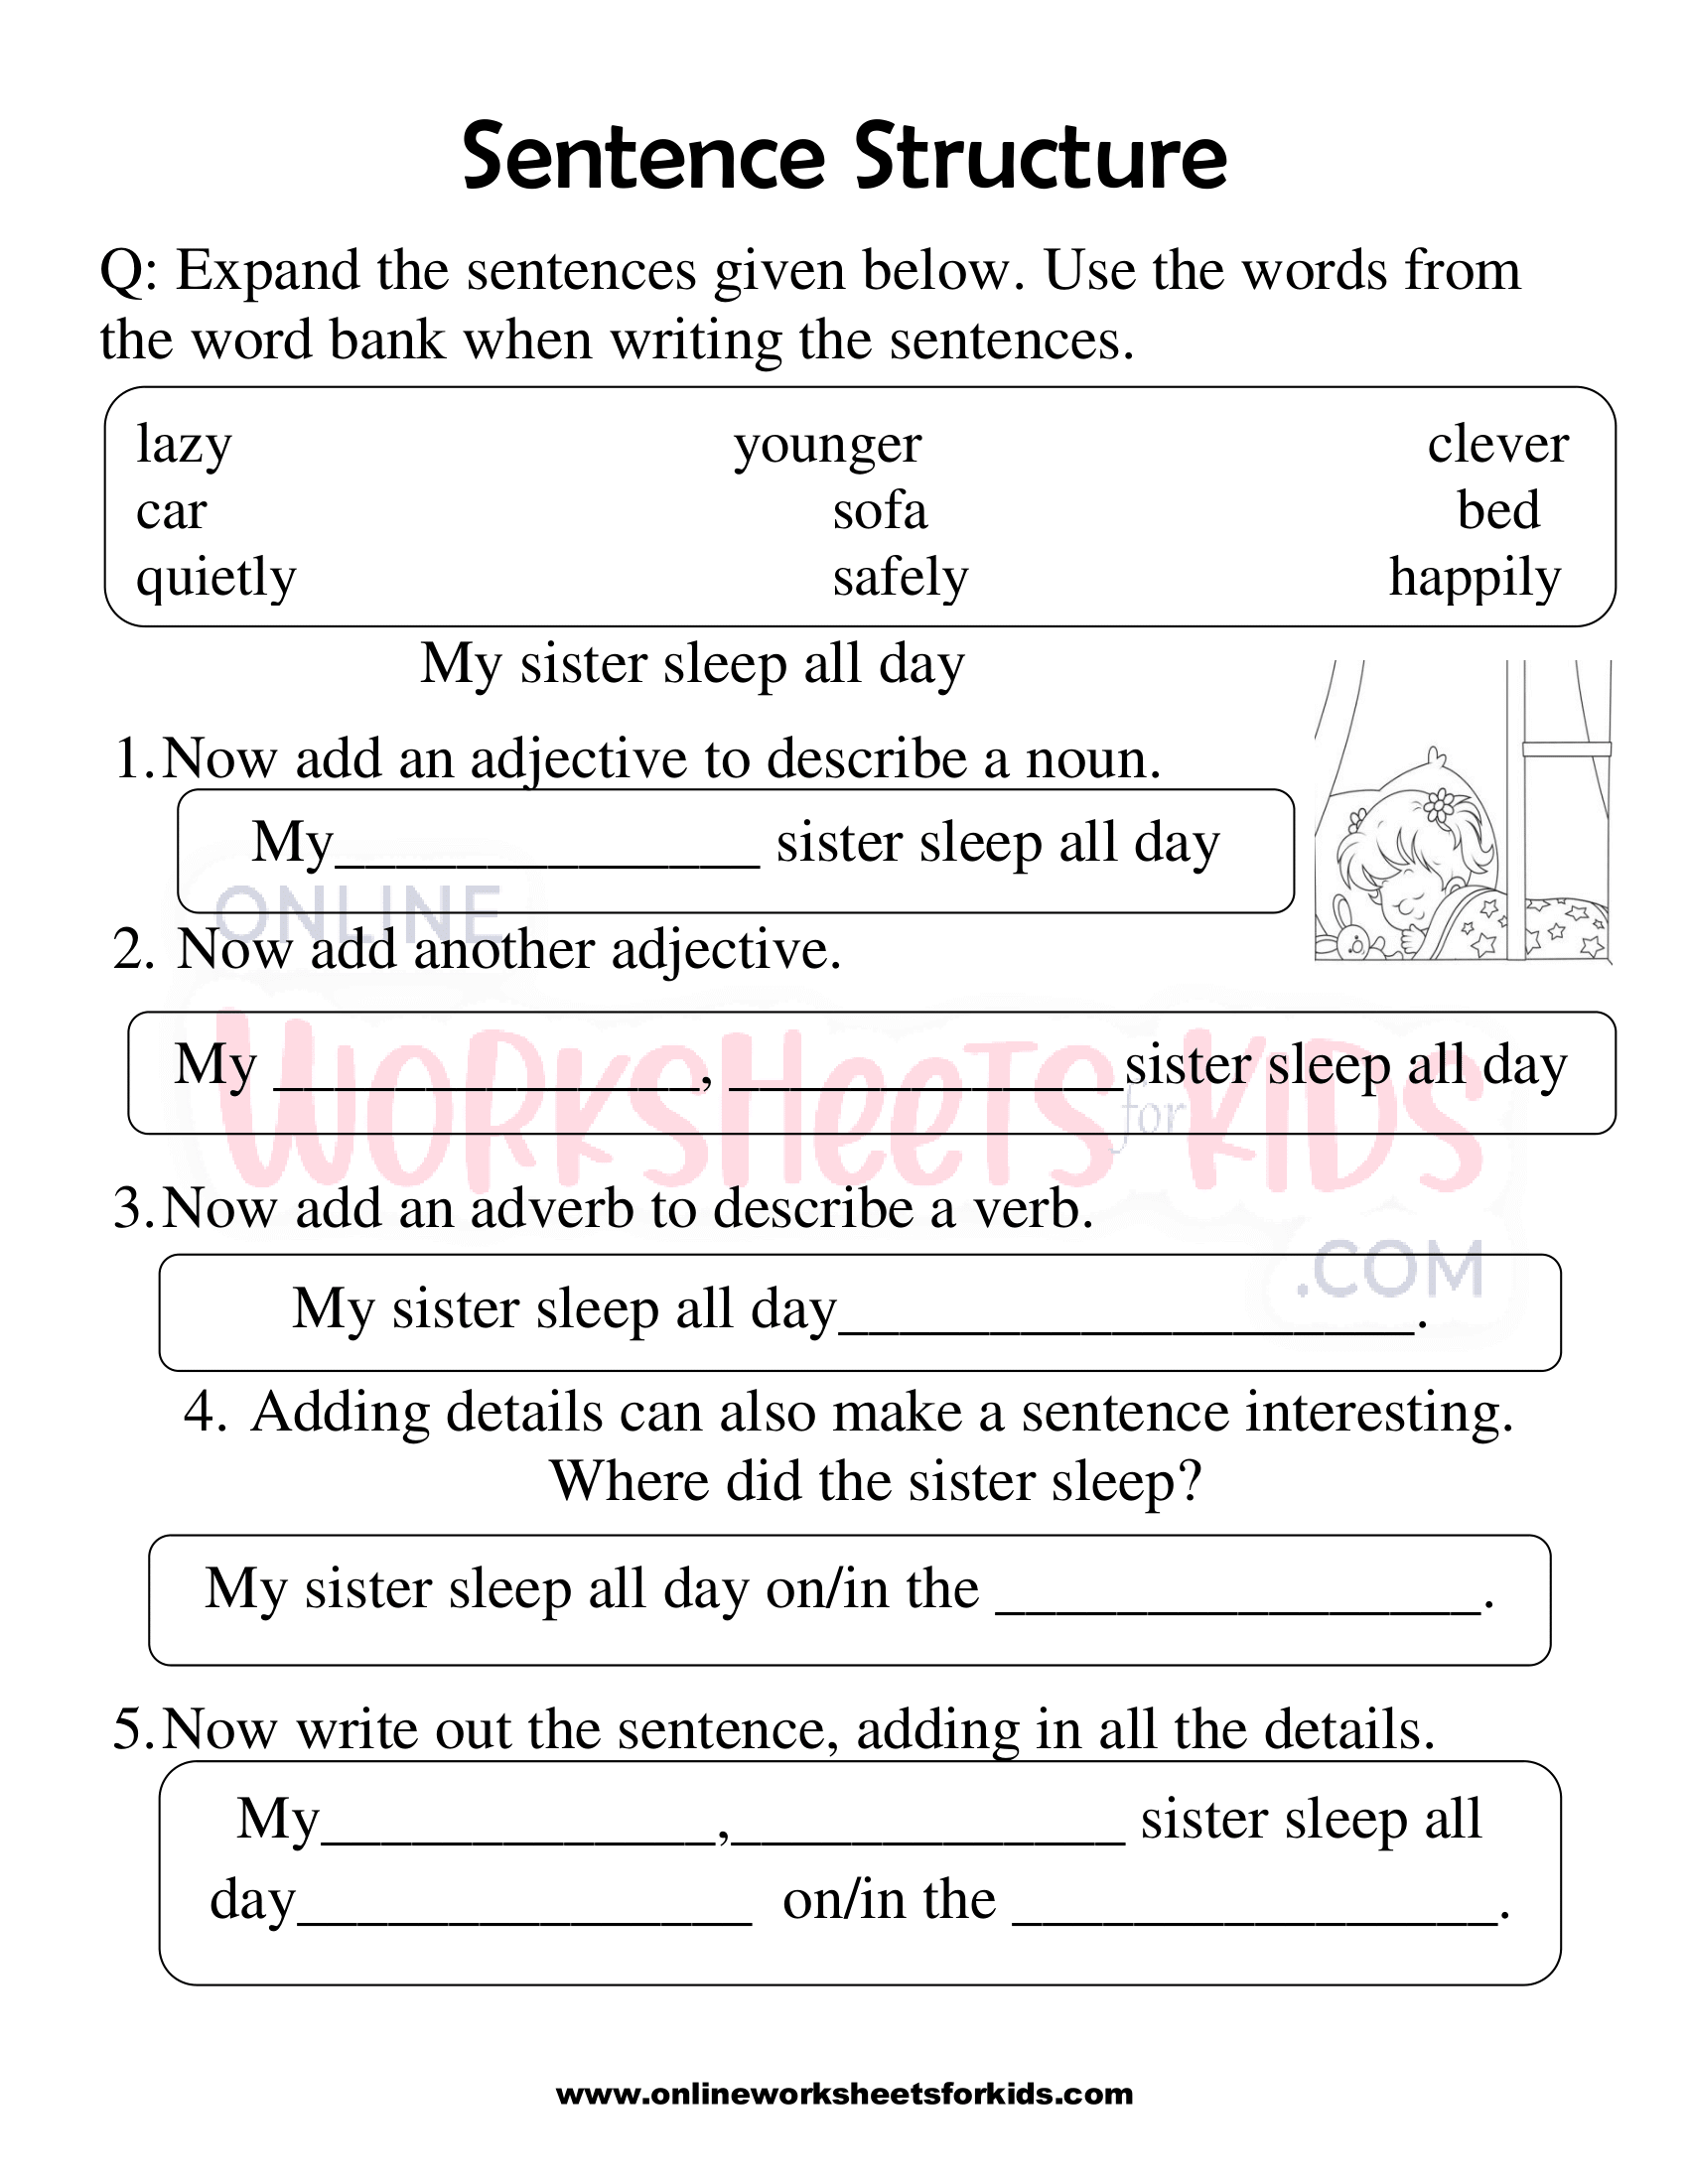 Sentence Structure Worksheets For 7th Grade